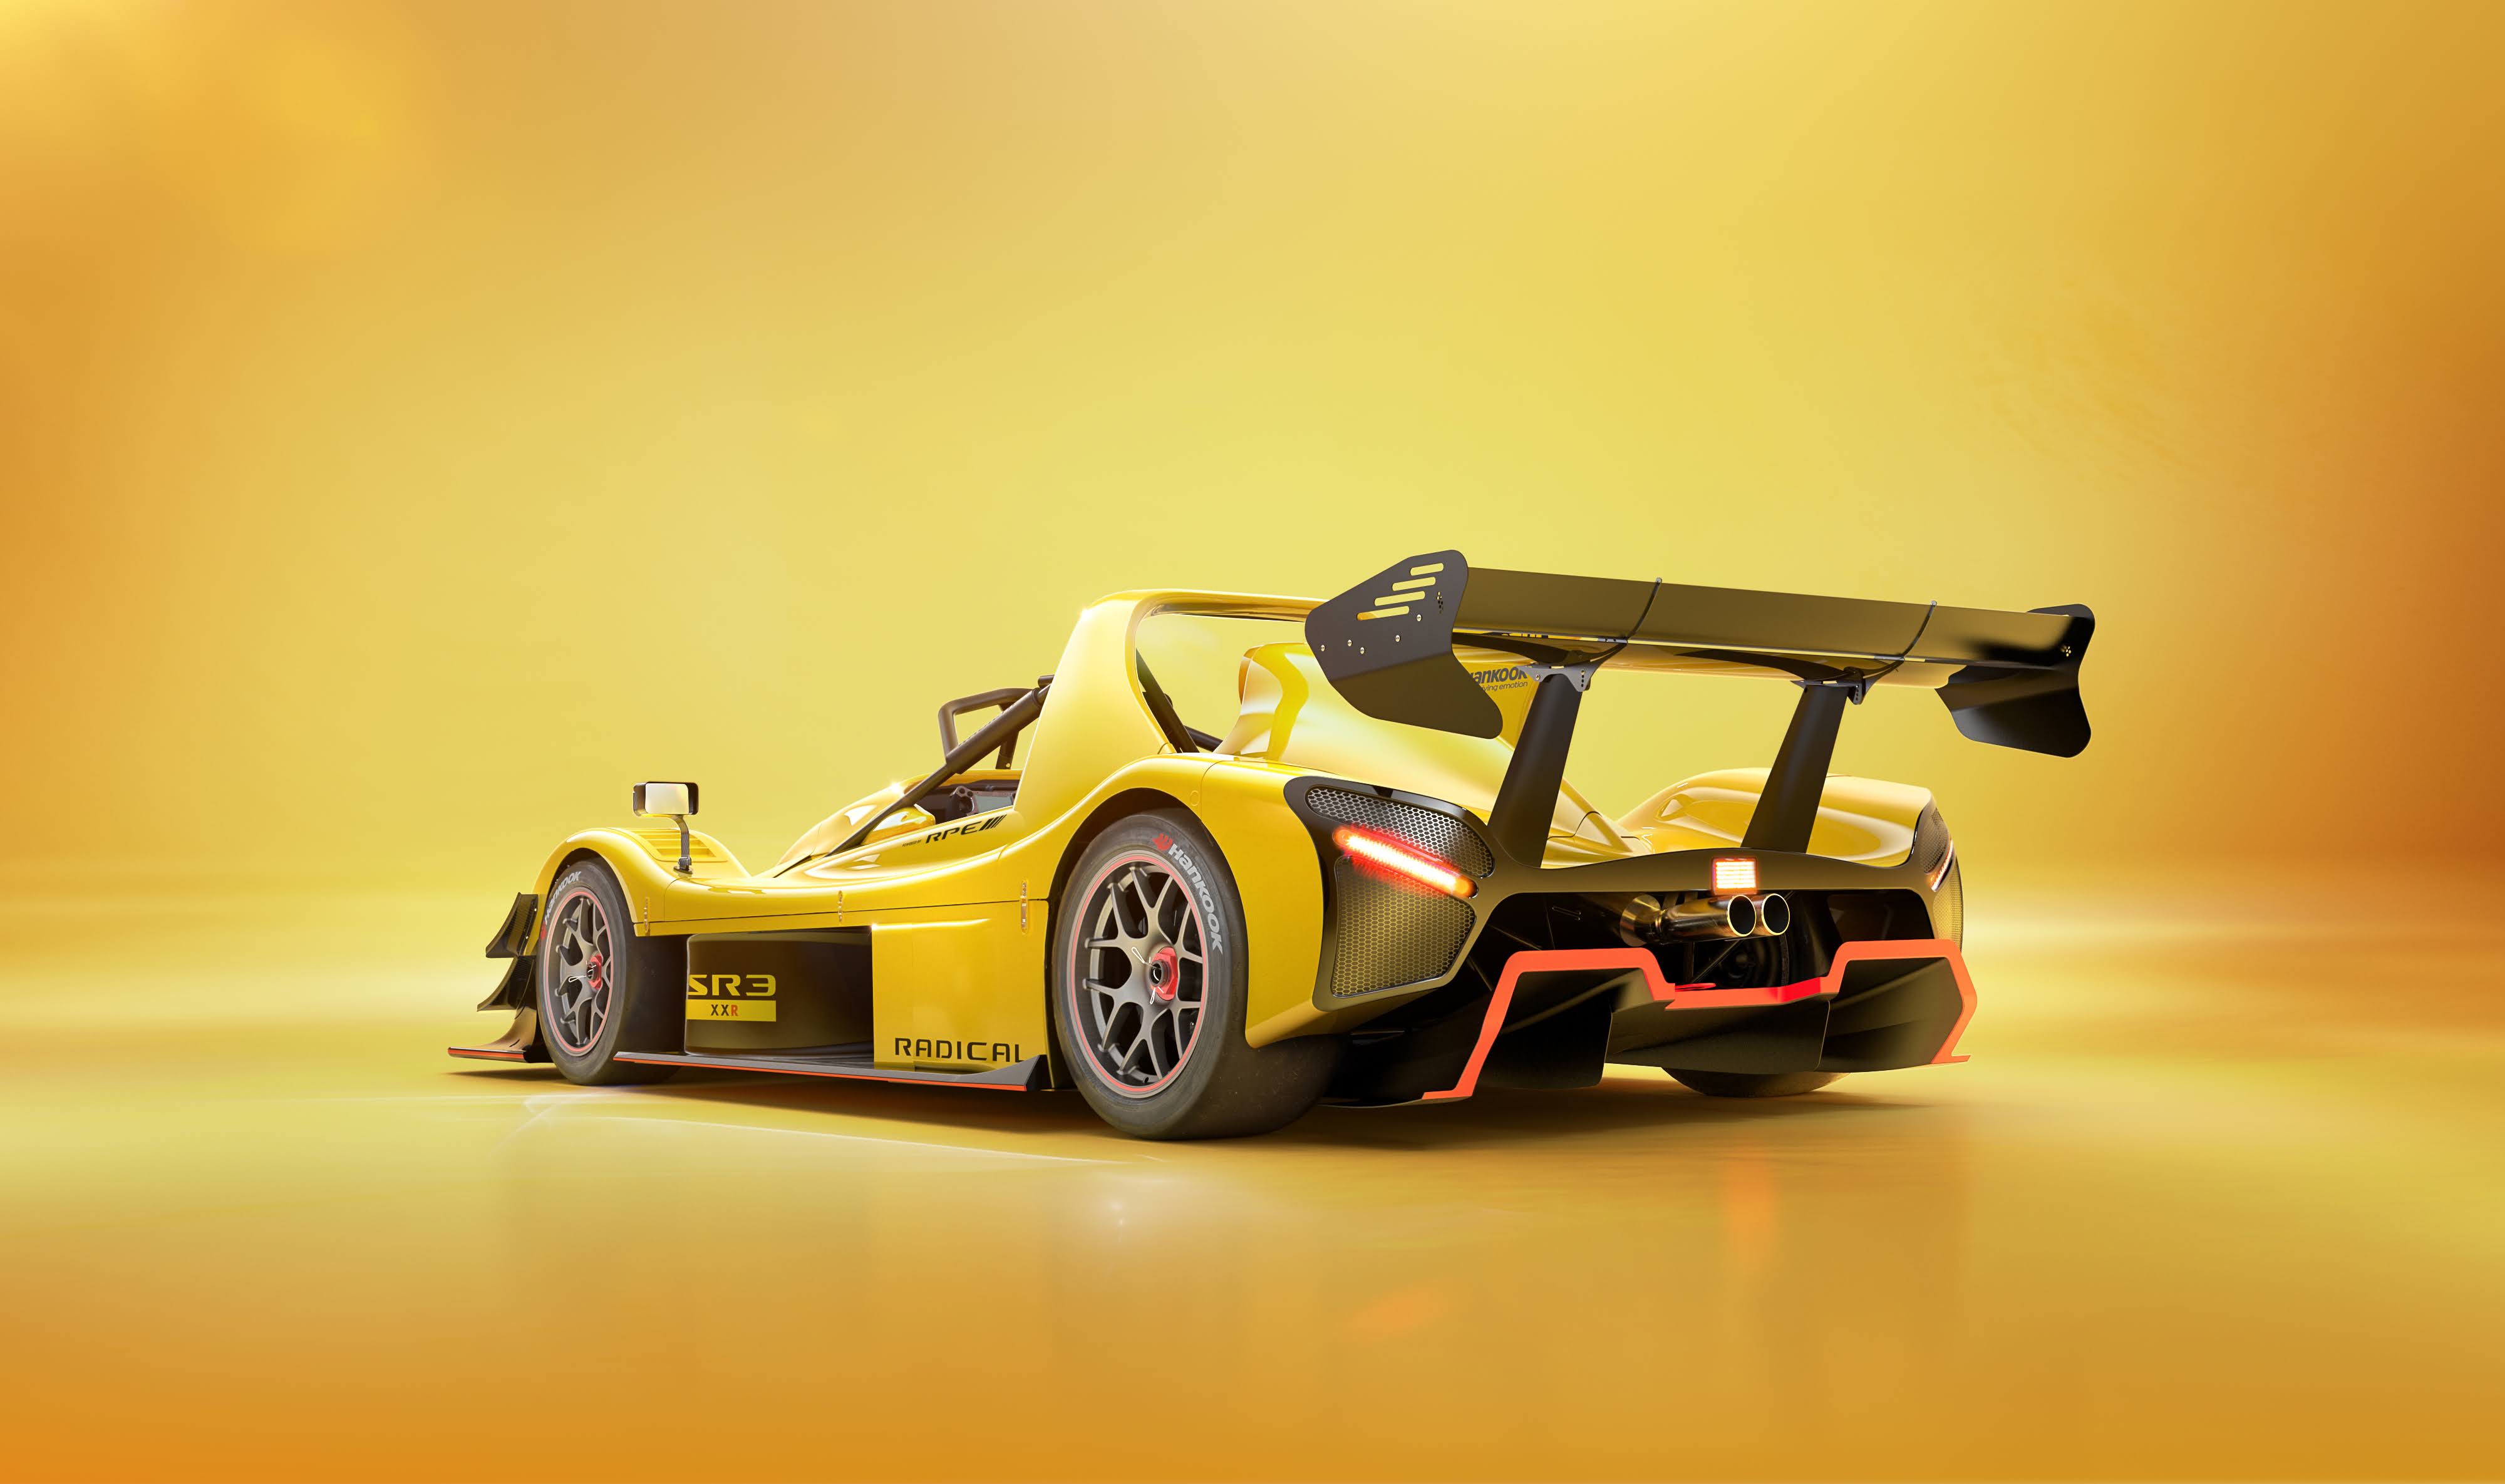 General 4000x2370 car vehicle motorsport yellow cars yellow background reflection minimalism simple background rear view taillights race cars Radical SR3 British cars